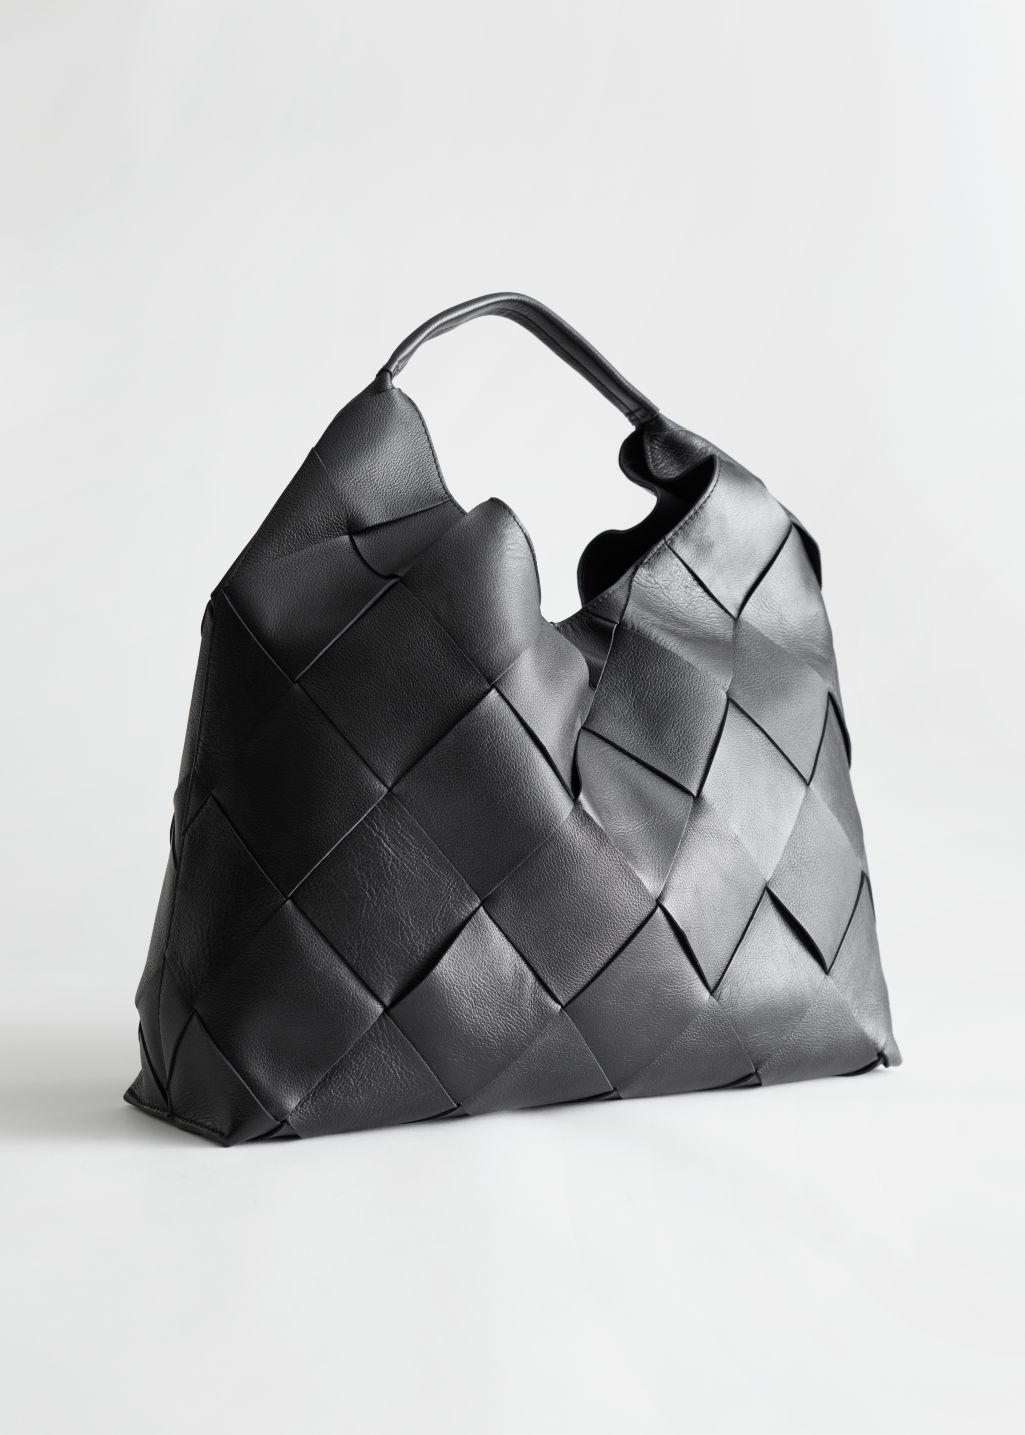 & Other Stories Braided Leather Tote Bag in Black | Lyst